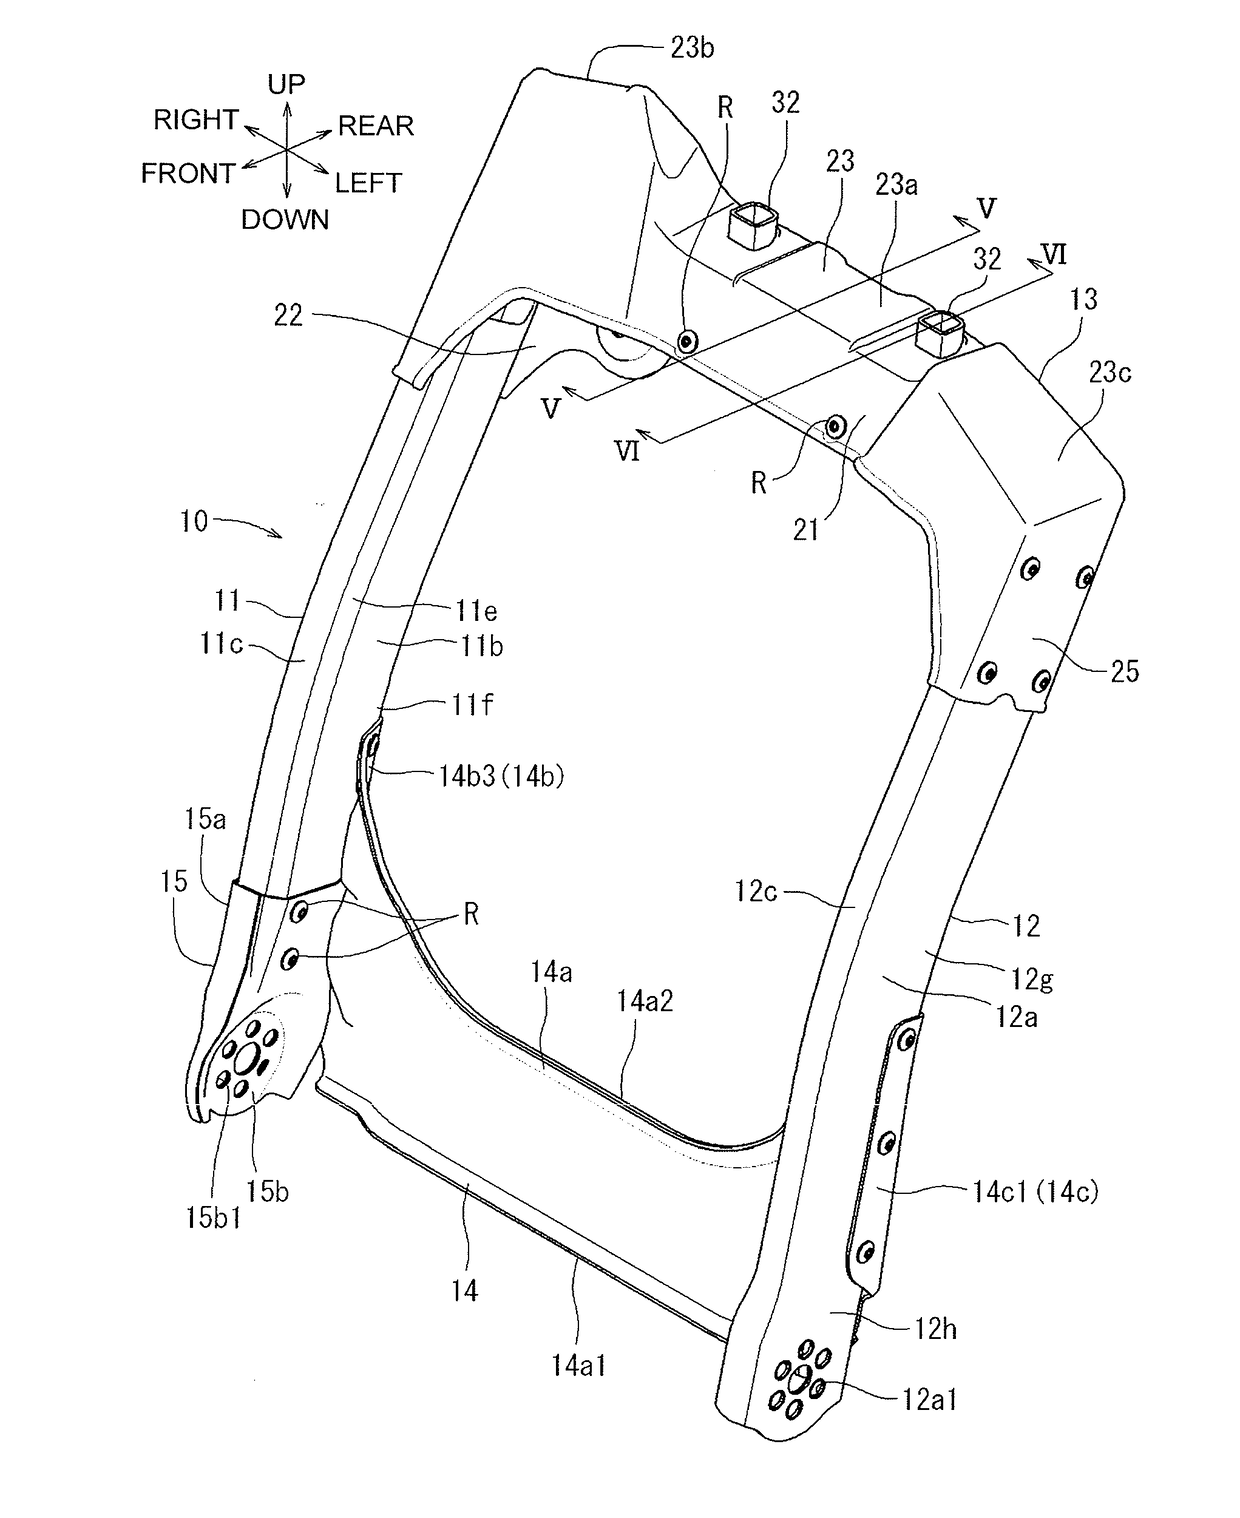 Back frame structure for vehicle seat